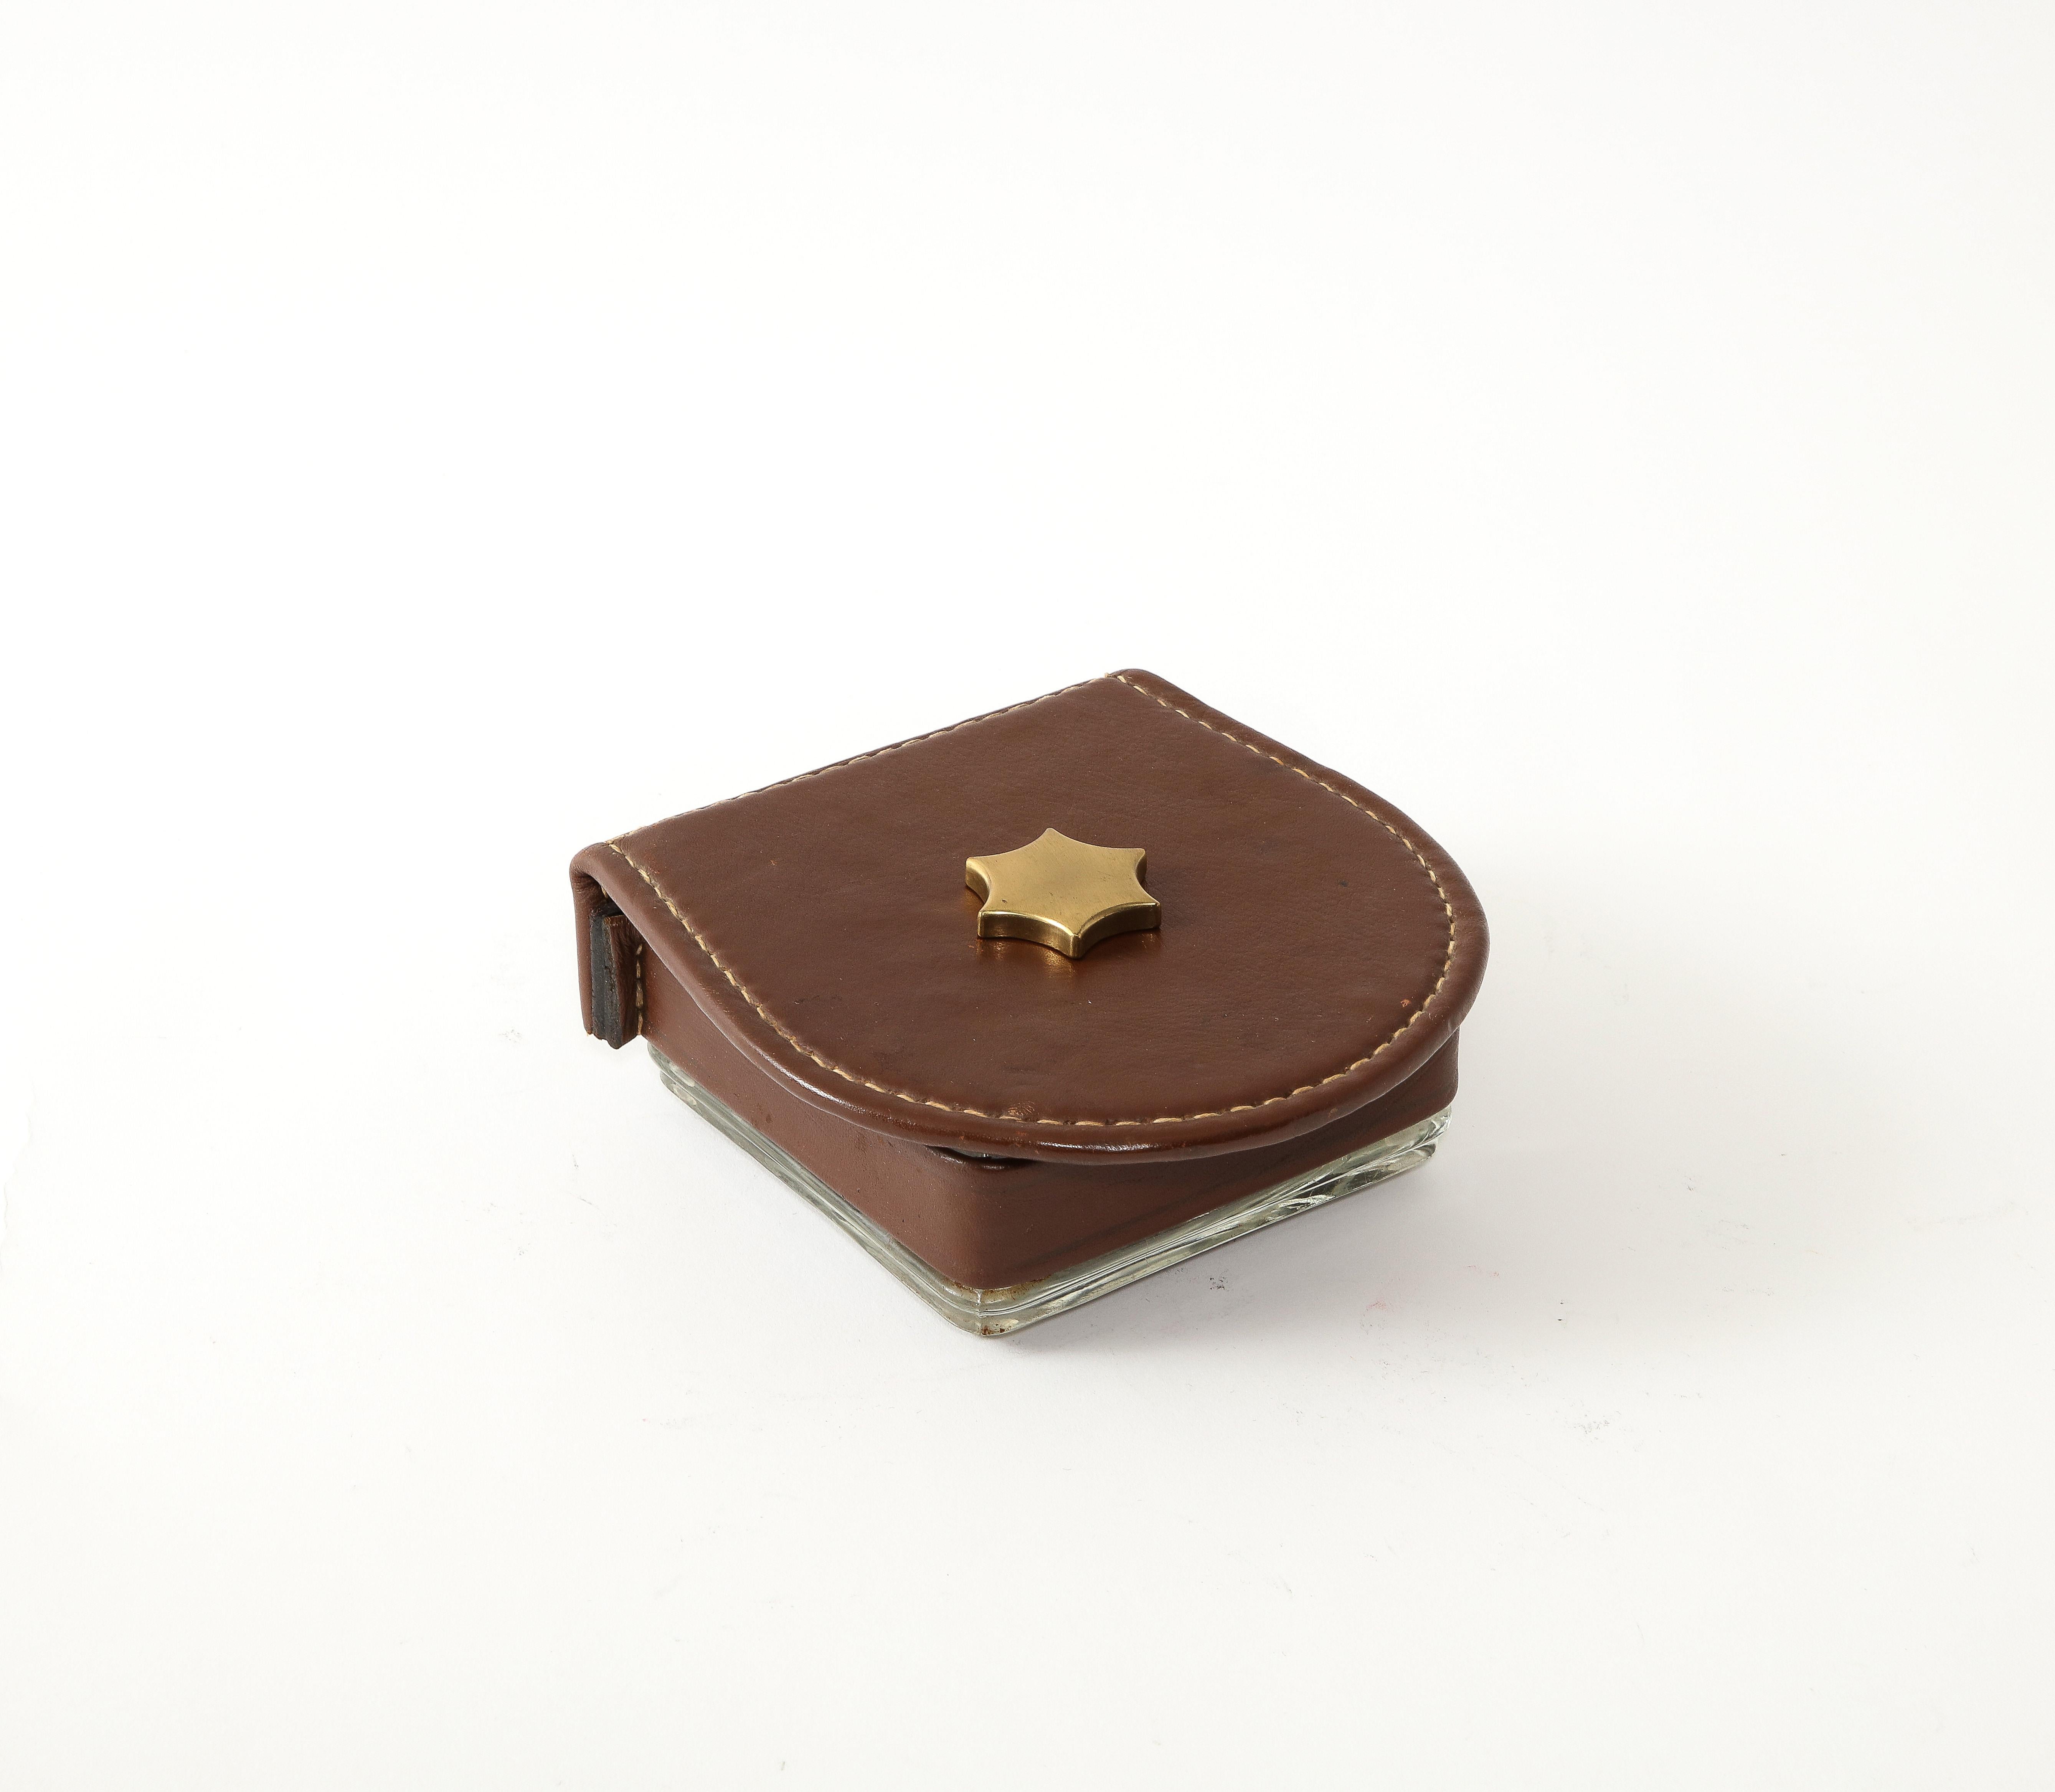 Leather-lidded cast glass box with a bronze star accent.